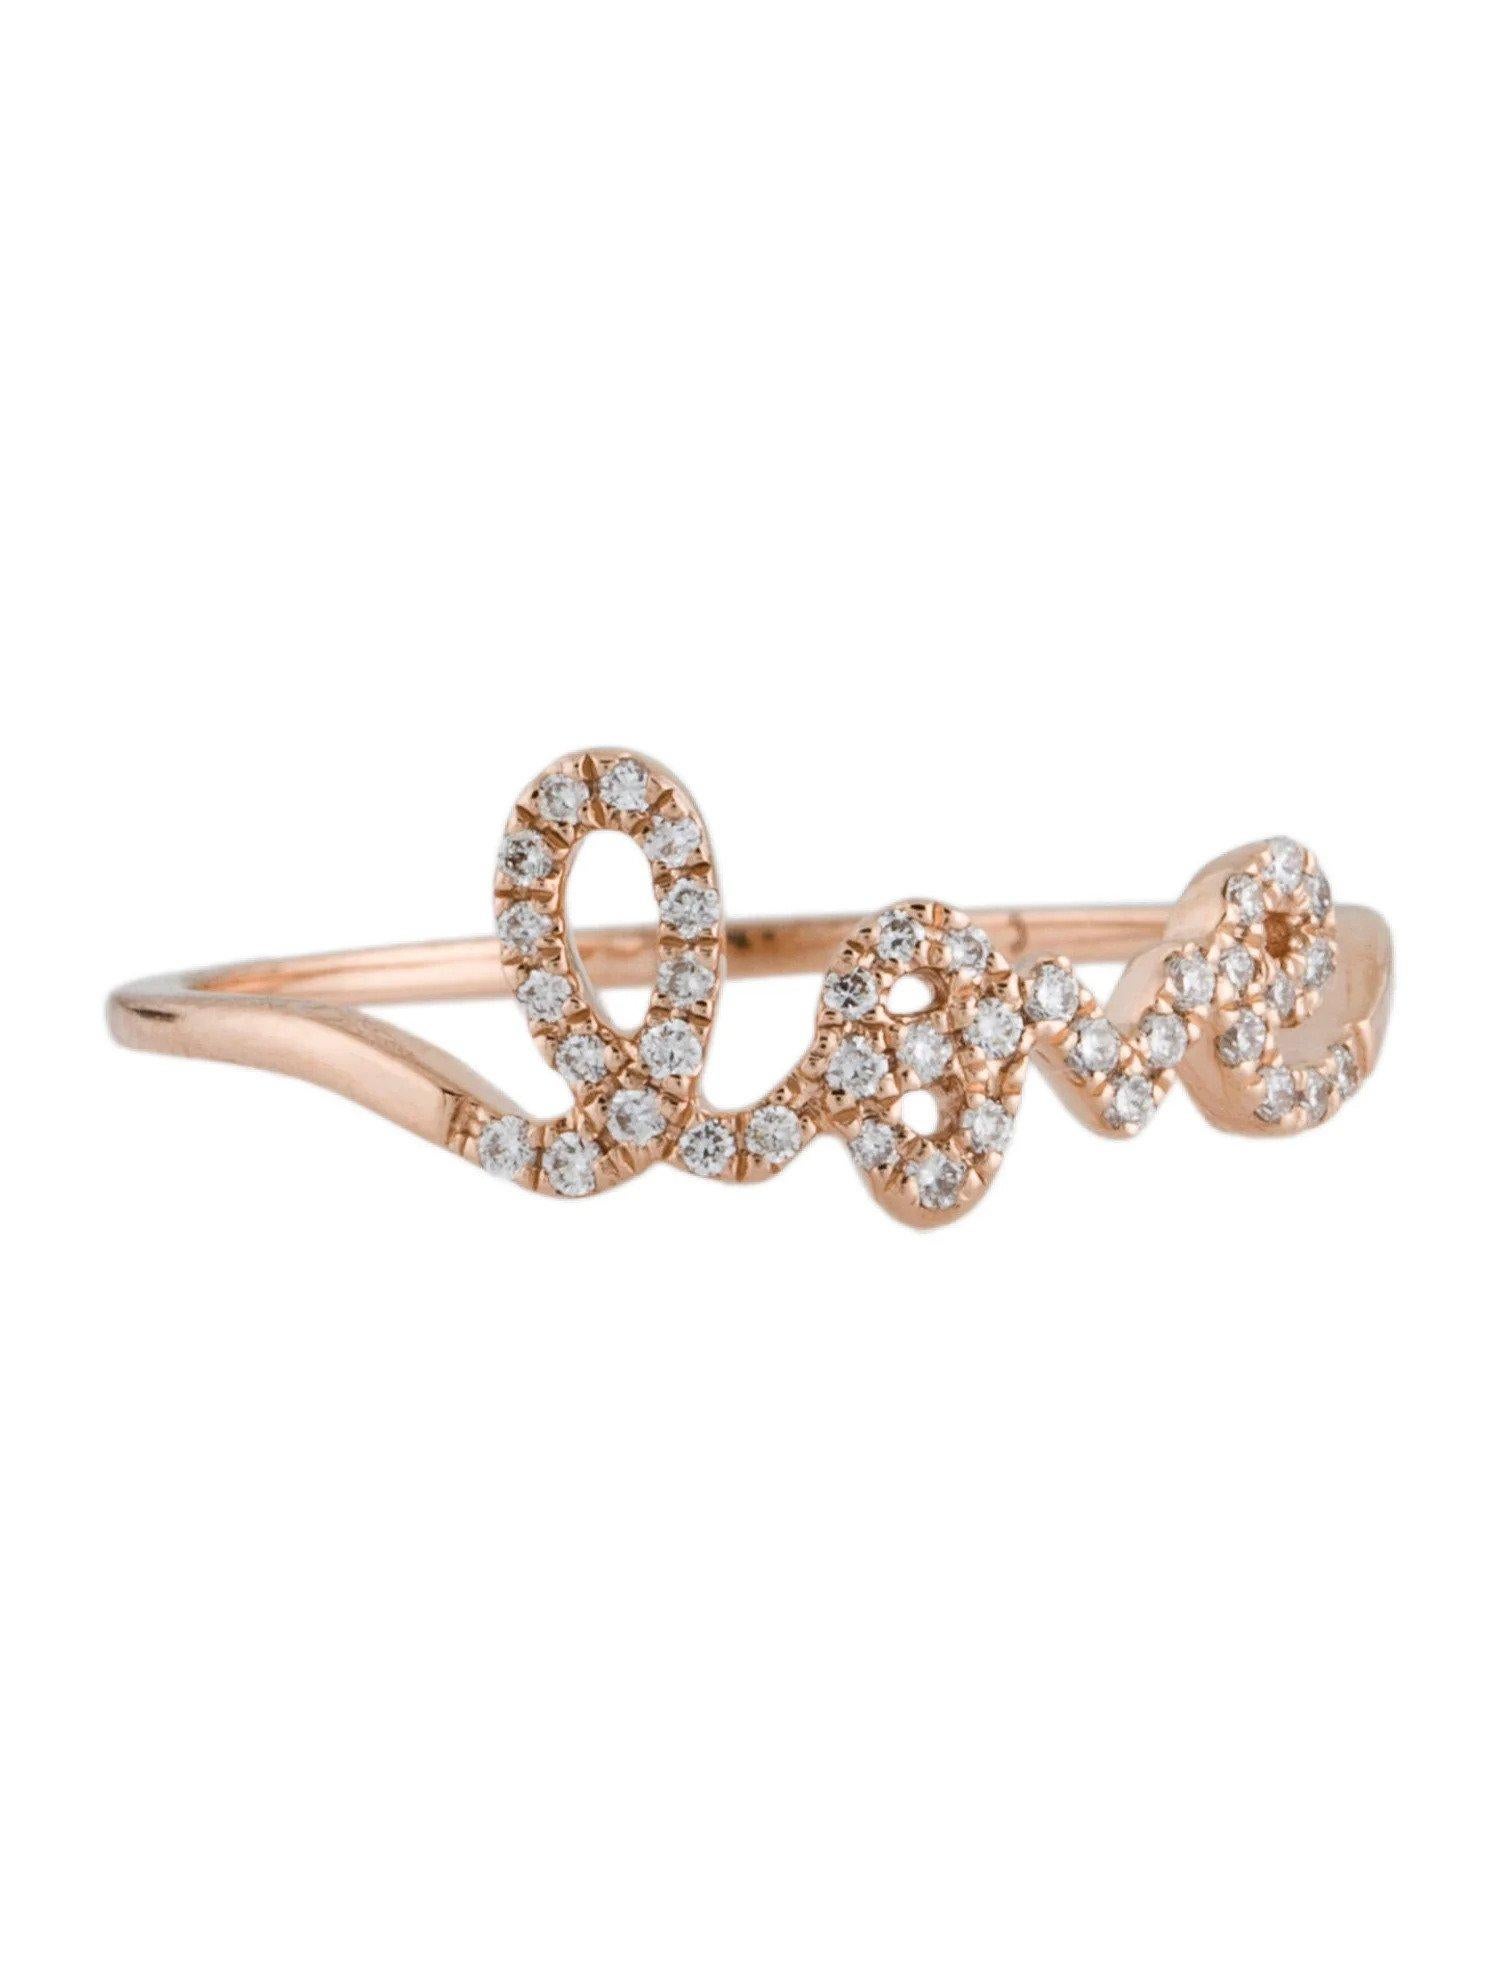 0.13 Carat Diamond Love Rose Gold Ring In New Condition For Sale In Great Neck, NY